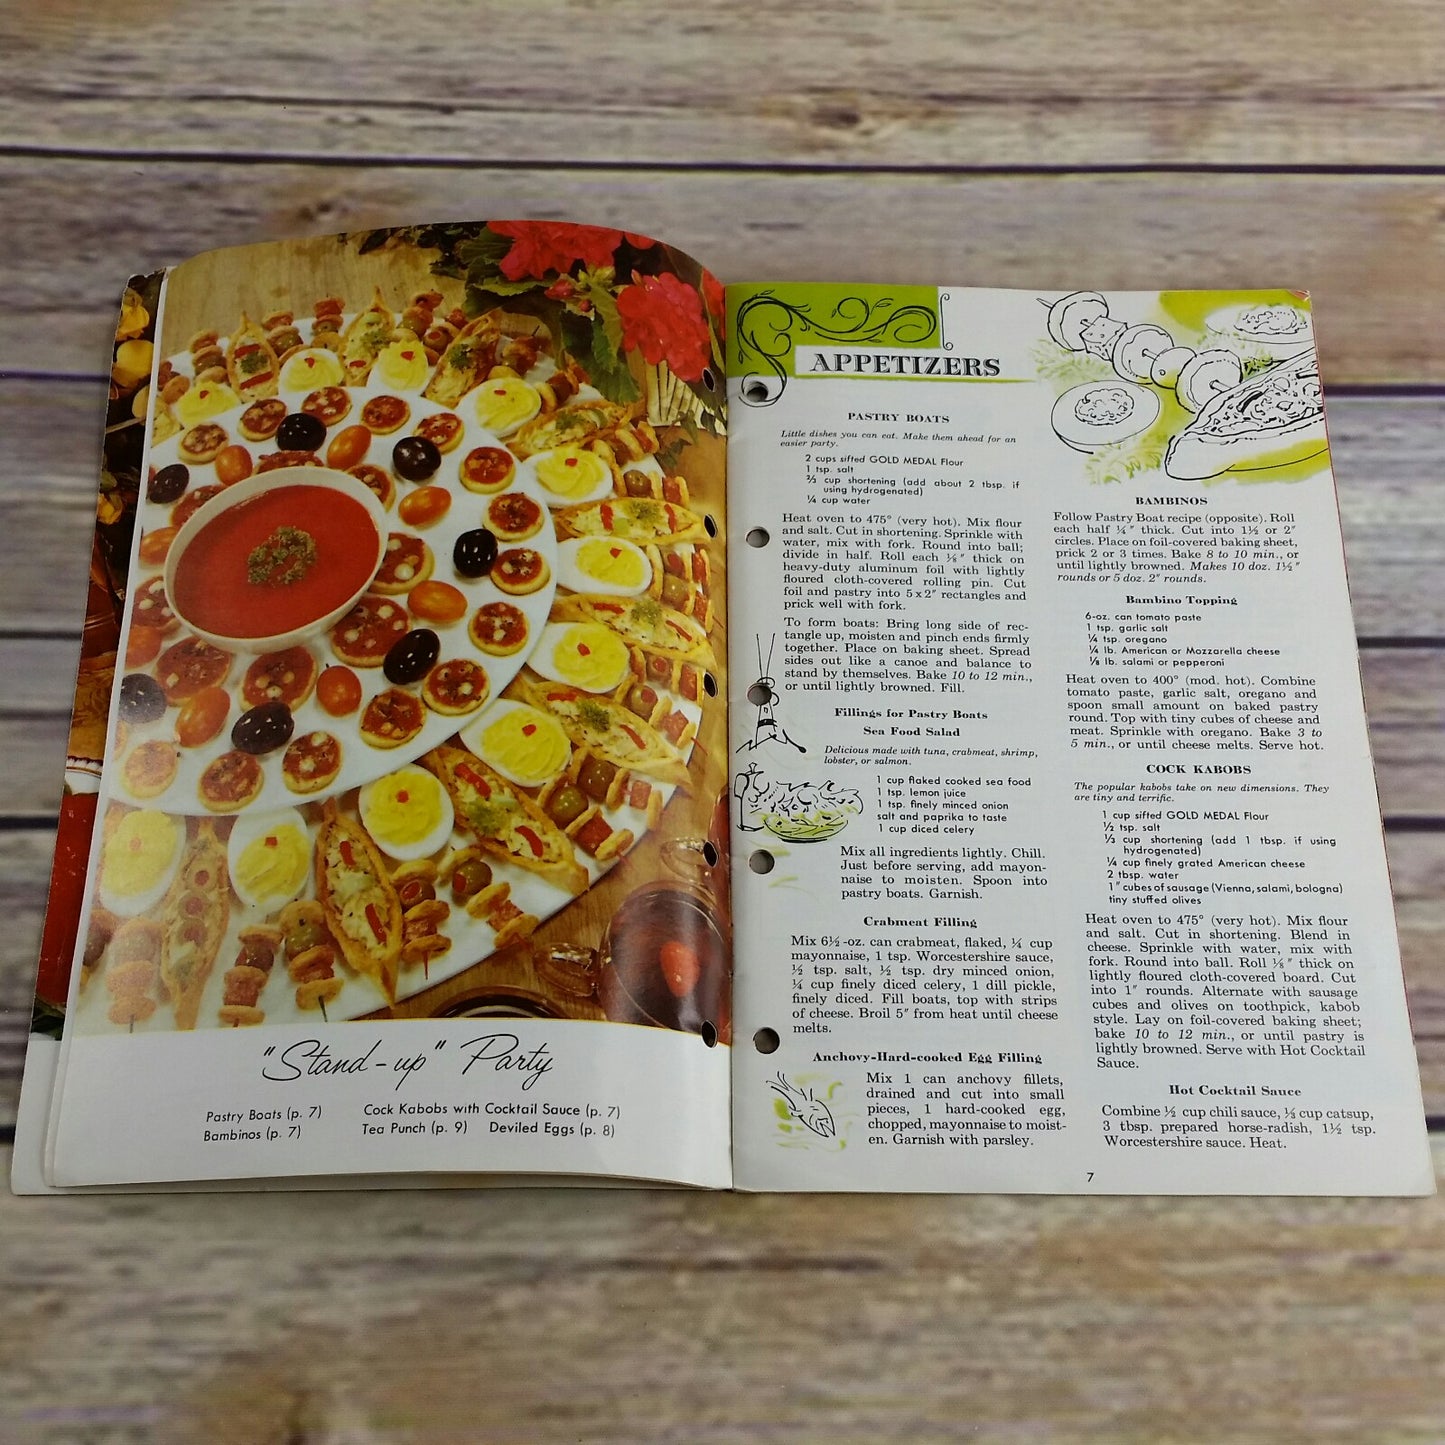 Vintage Cookbook Betty Crocker Frankly Fancy Foods Recipes Book 1959 Soft Cover Booklet Parties Desserts Main Dishes - At Grandma's Table